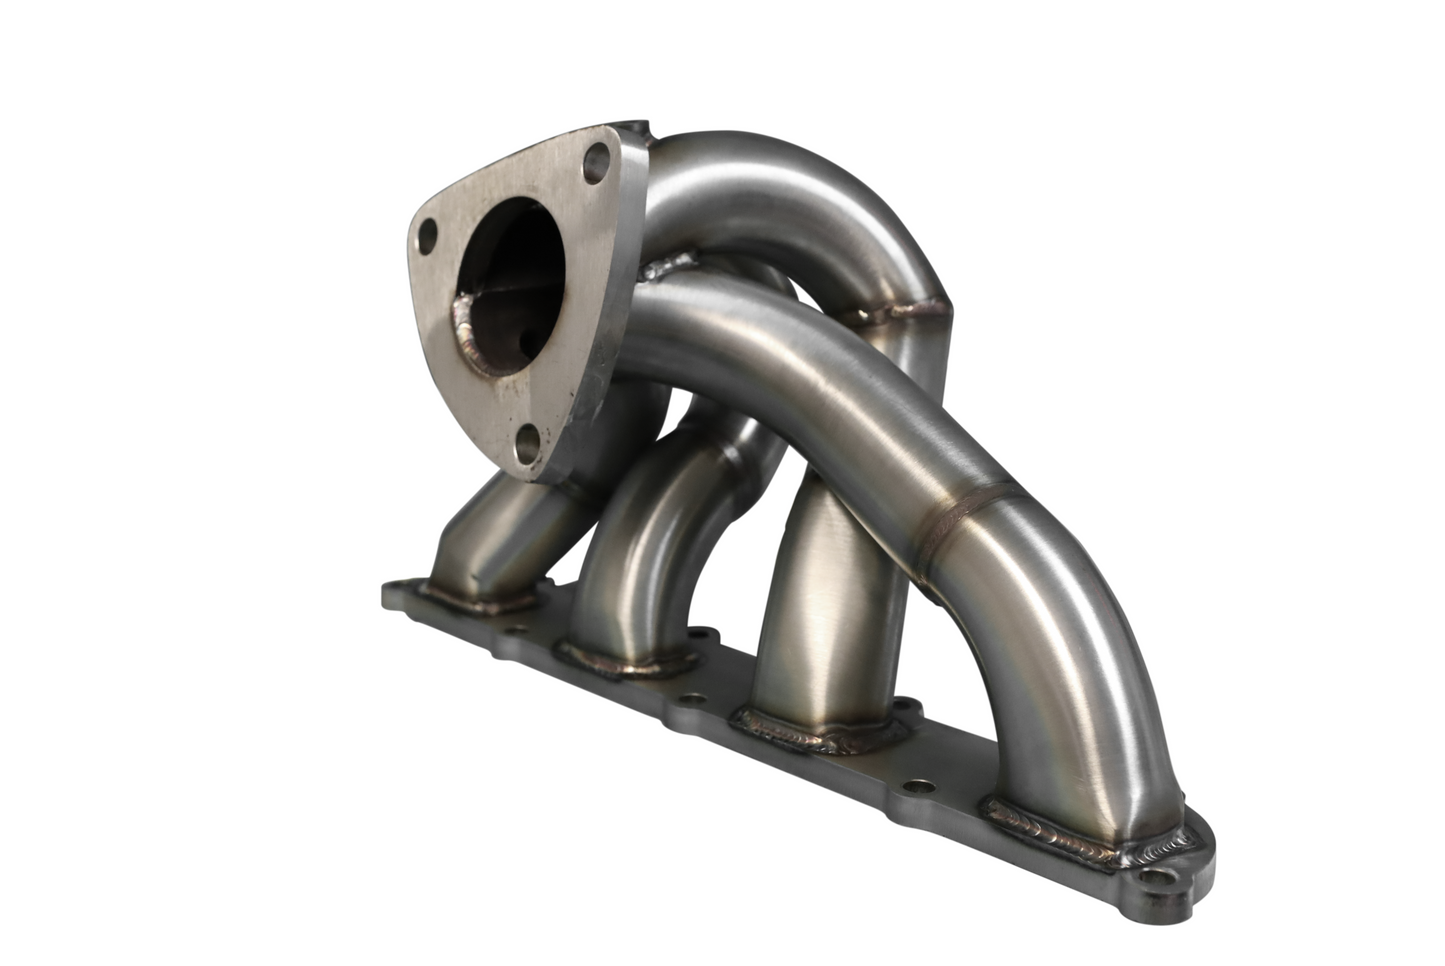 SPECIAL EDITION - TWIST DYNAMICS 2020+ DUAL EXHAUST PROMOTIONAL BUNDLE KIT - LIMITED SUPPLY AVAILABLE!